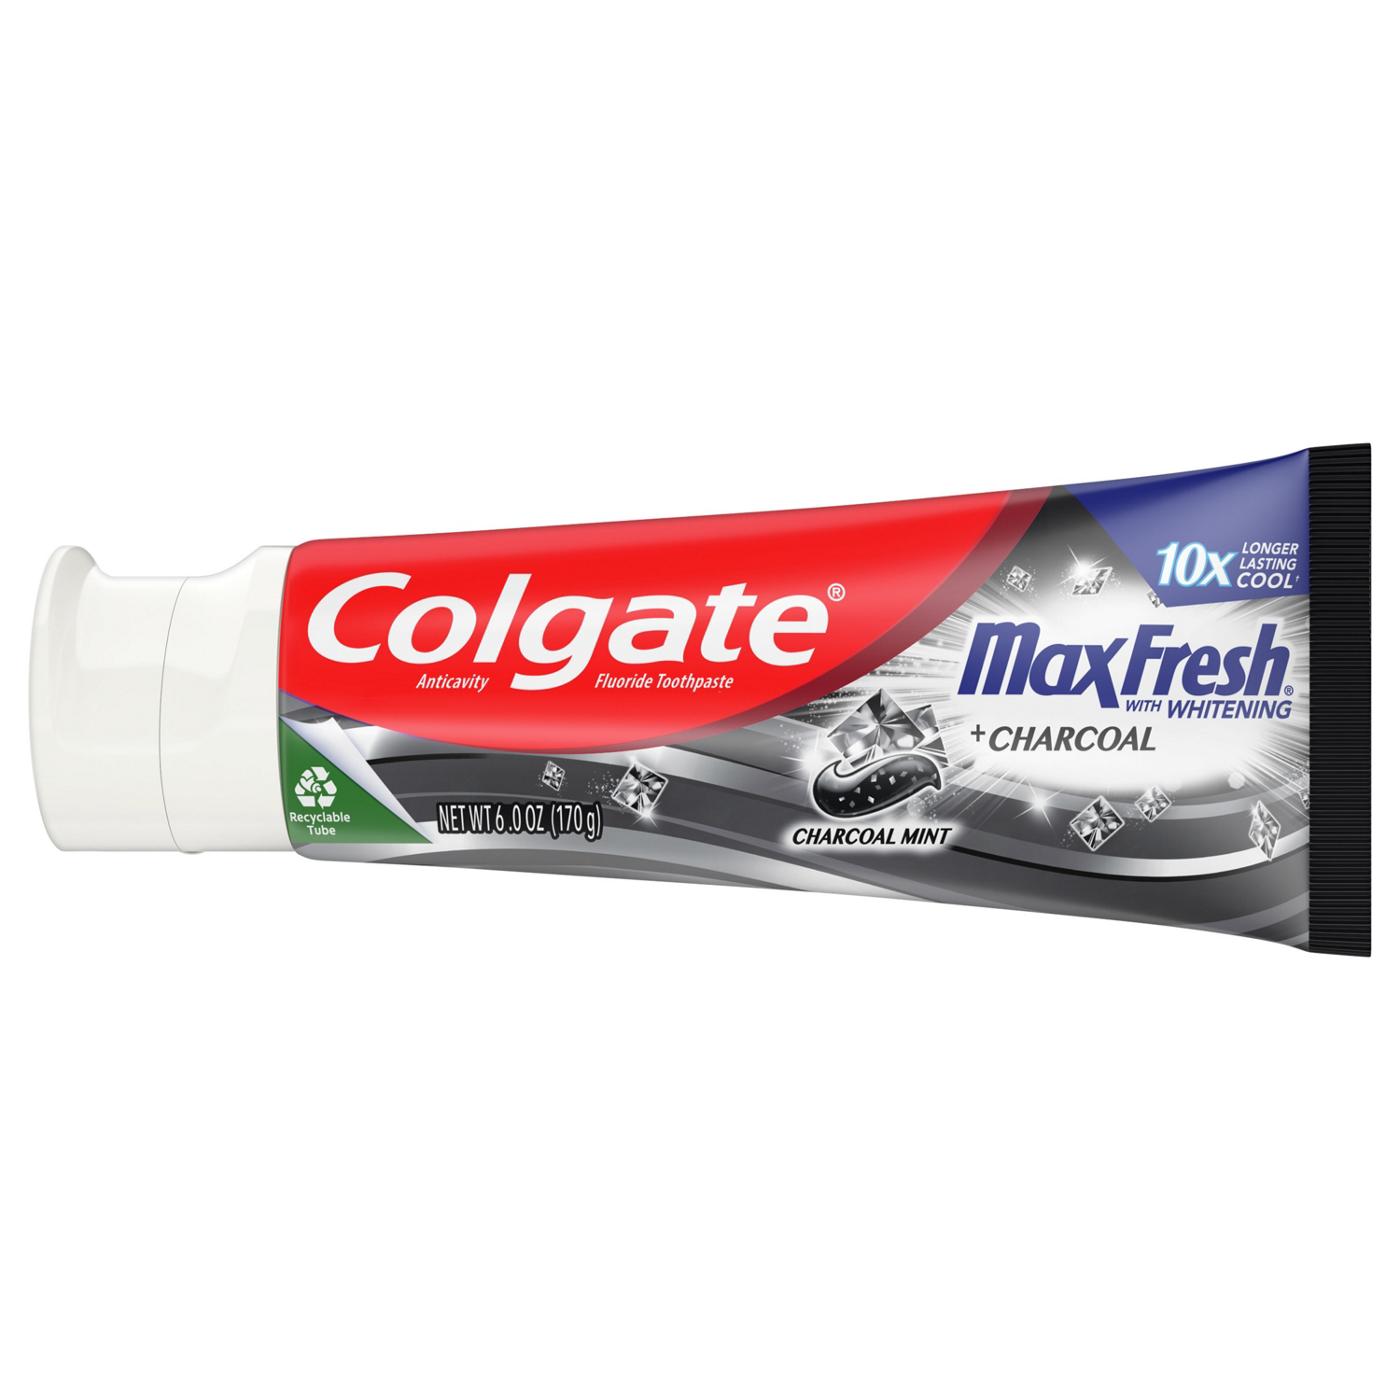 Colgate Max Fresh + Charcoal Anticavity Toothpaste - Charcoal Mint; image 5 of 5